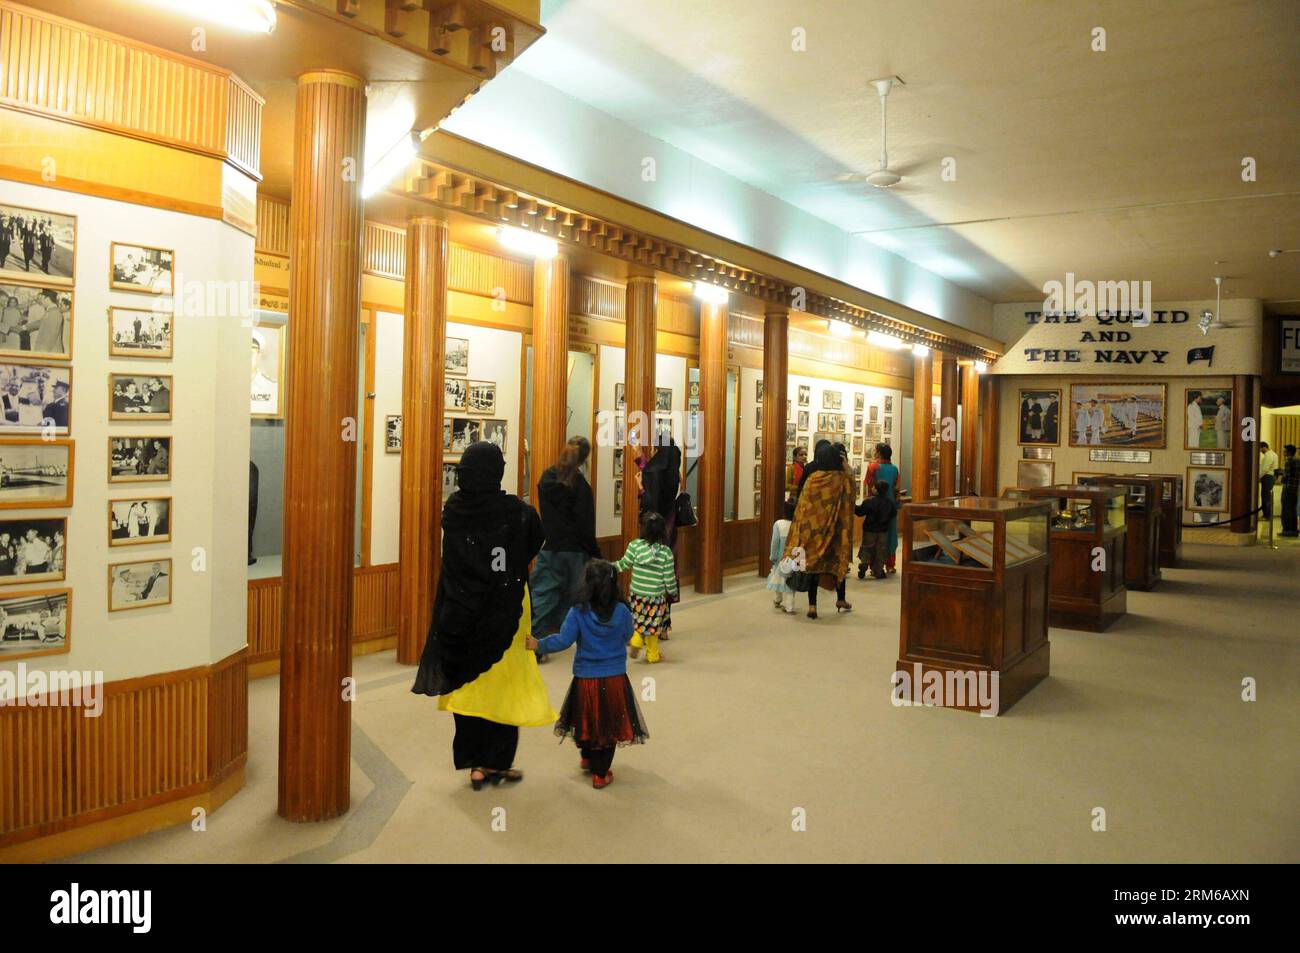 (131229) -- KARACHI, Dec. 29, 2013 (Xinhua) -- People visit Pakistan Maritime Museum in the port city of Karachi, southern Pakistan, Dec. 29, 2013. Pakistan Maritime Museum is a naval museum and park in Karachi. It is based on modern concepts of presentation and interactive education. (Xinhua/Ahmad Kamal) PAKISTAN-KARACHI-MARITIME-MUSEUM PUBLICATIONxNOTxINxCHN   Karachi DEC 29 2013 XINHUA Celebrities Visit Pakistan Maritime Museum in The Port City of Karachi Southern Pakistan DEC 29 2013 Pakistan Maritime Museum IS a Naval Museum and Park in Karachi IT IS Based ON Modern Concepts of PRESENTATI Stock Photo